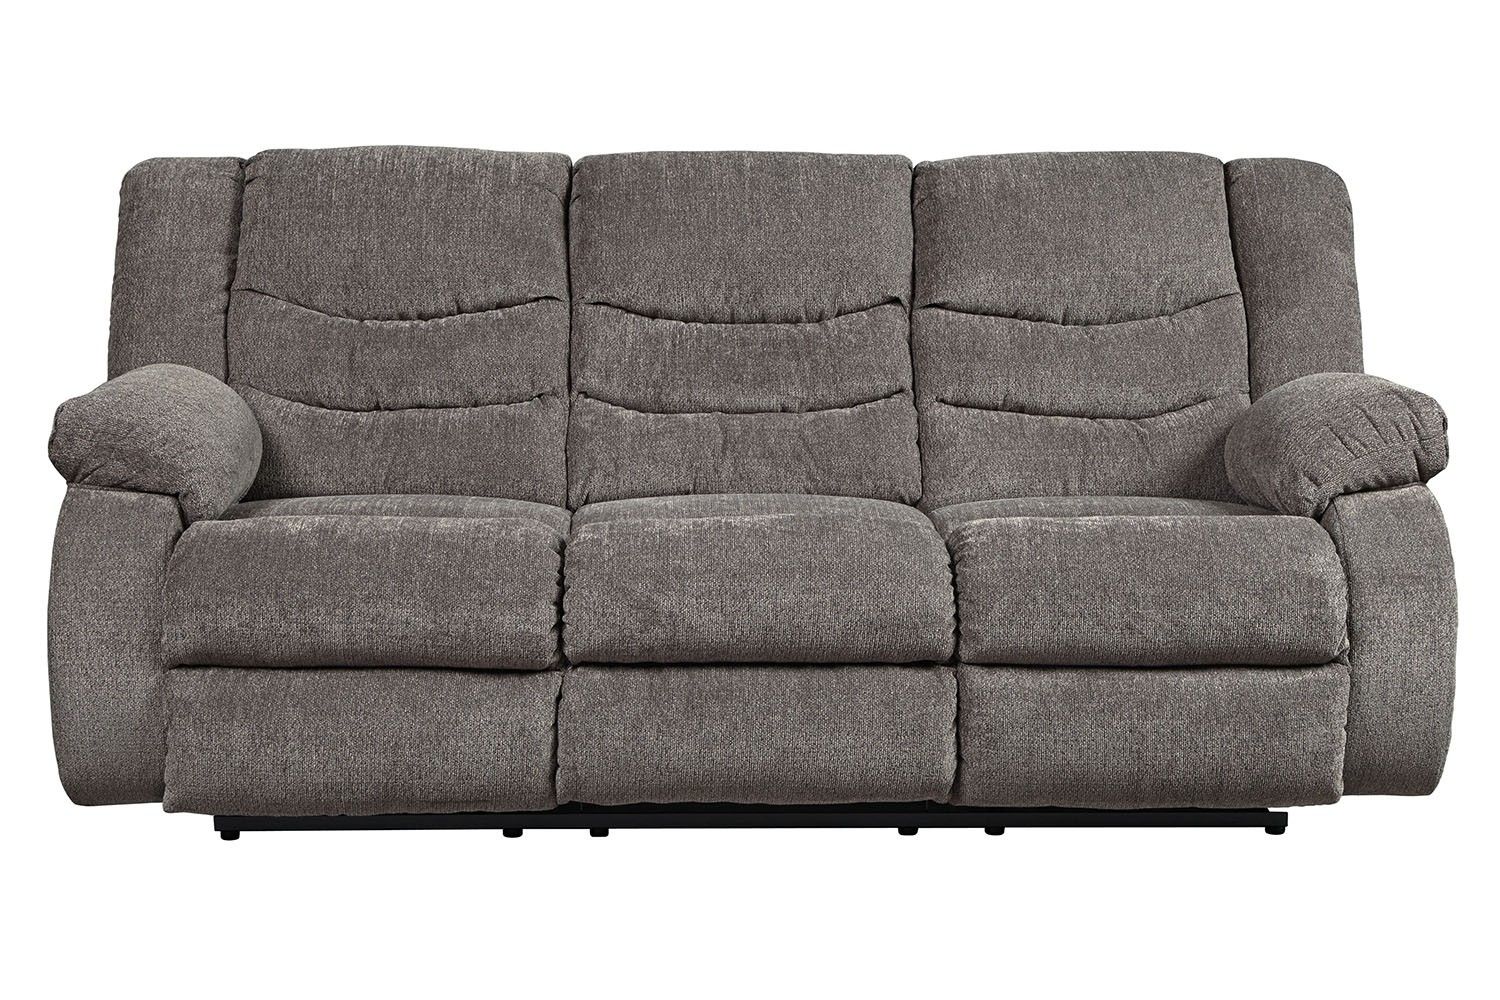 Sofas & Couches | Save Mor Online And In Store With Regard To Avery 2 Piece Sectionals With Laf Armless Chaise (View 16 of 25)